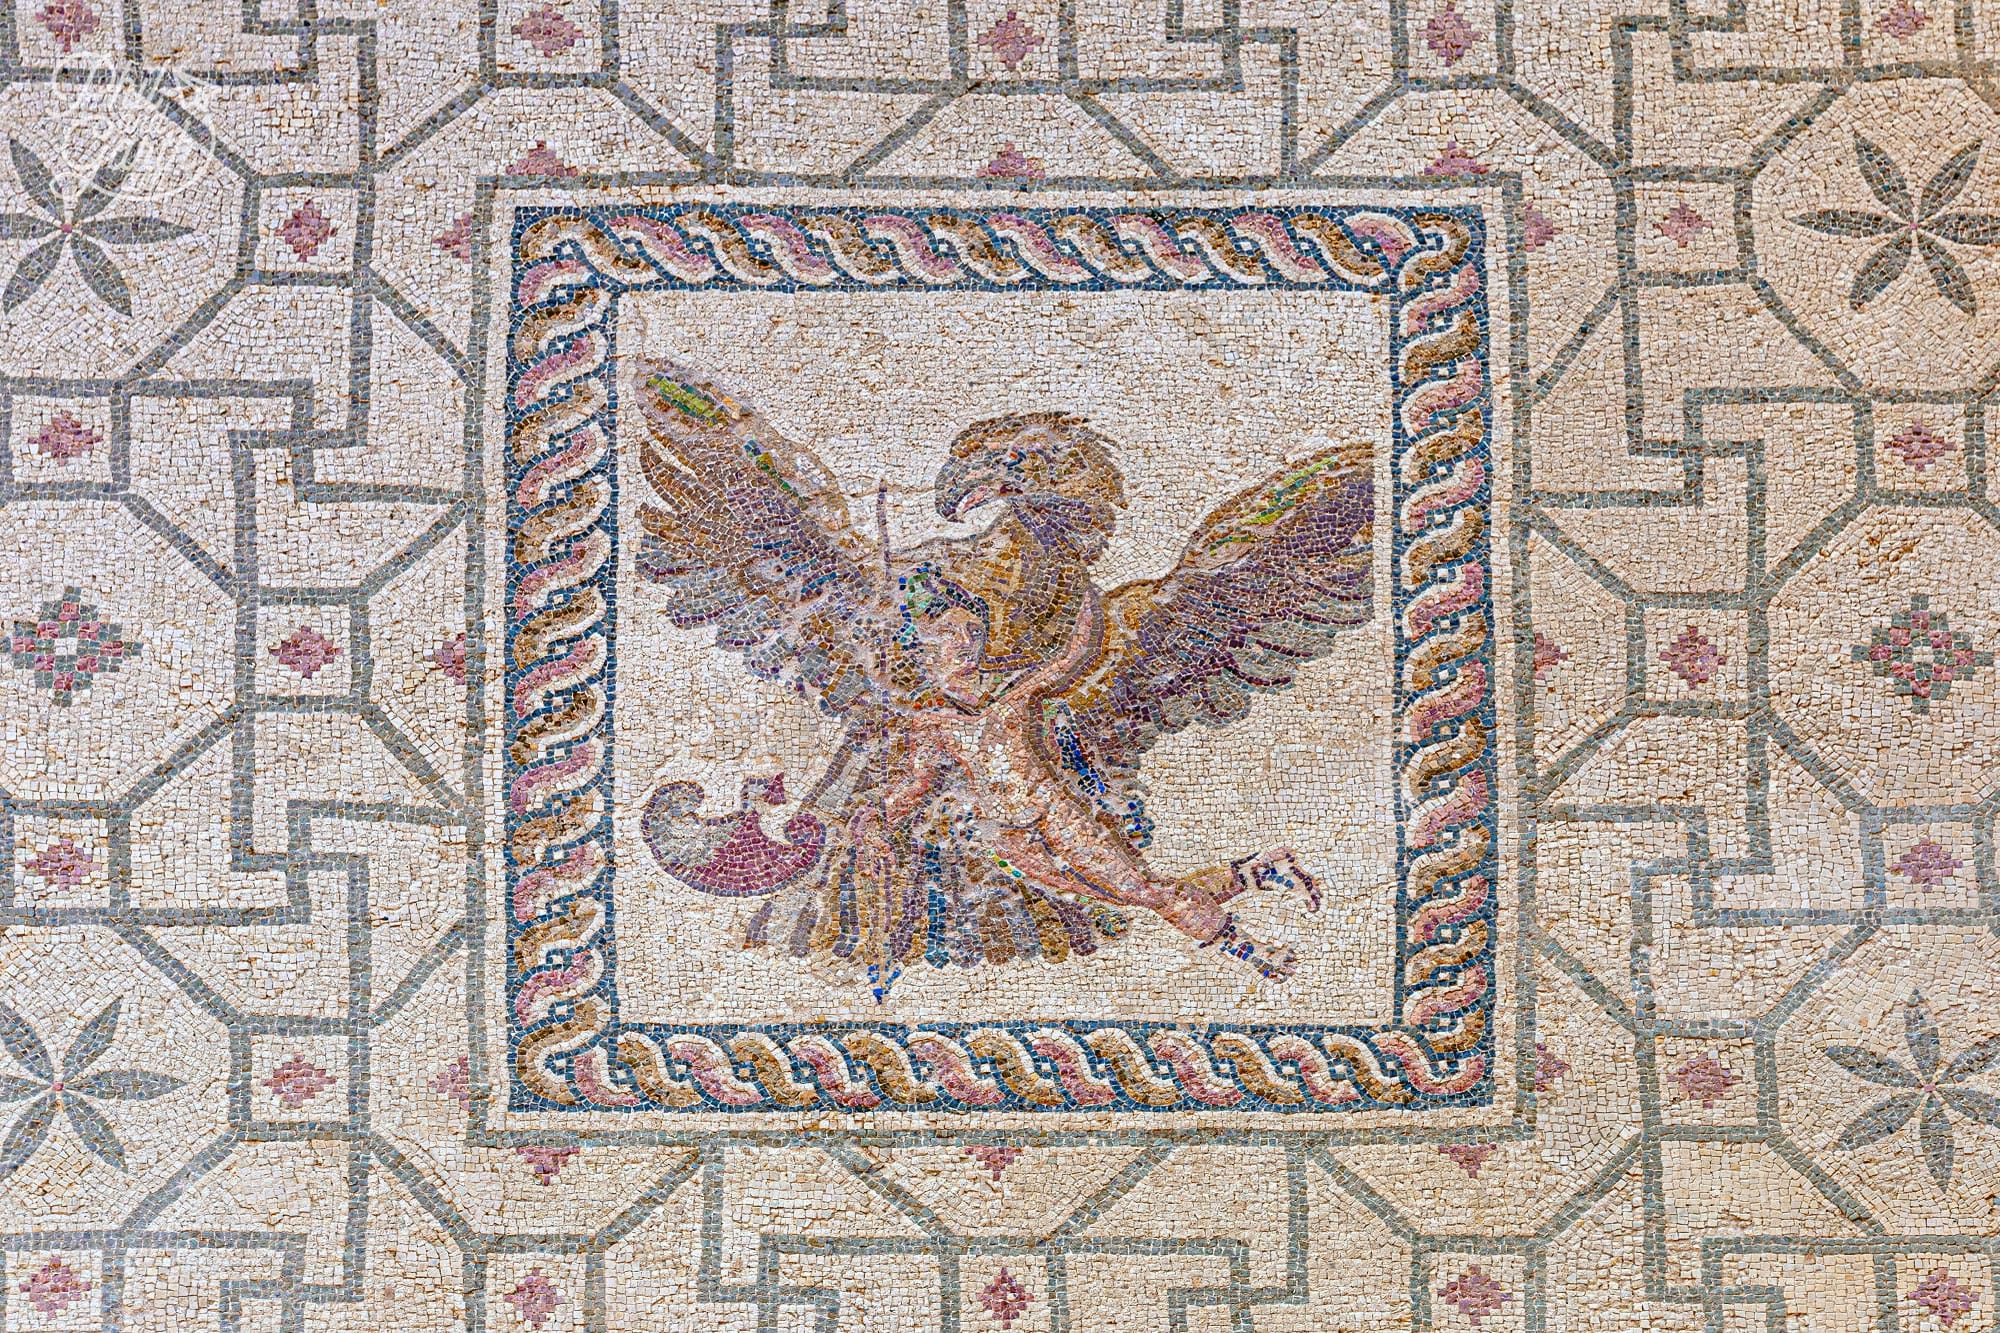 Mosaic of Zeus abducting Ganymede in the House of Dionysos in the Paphos Archaeological Park Paphos Cyprus